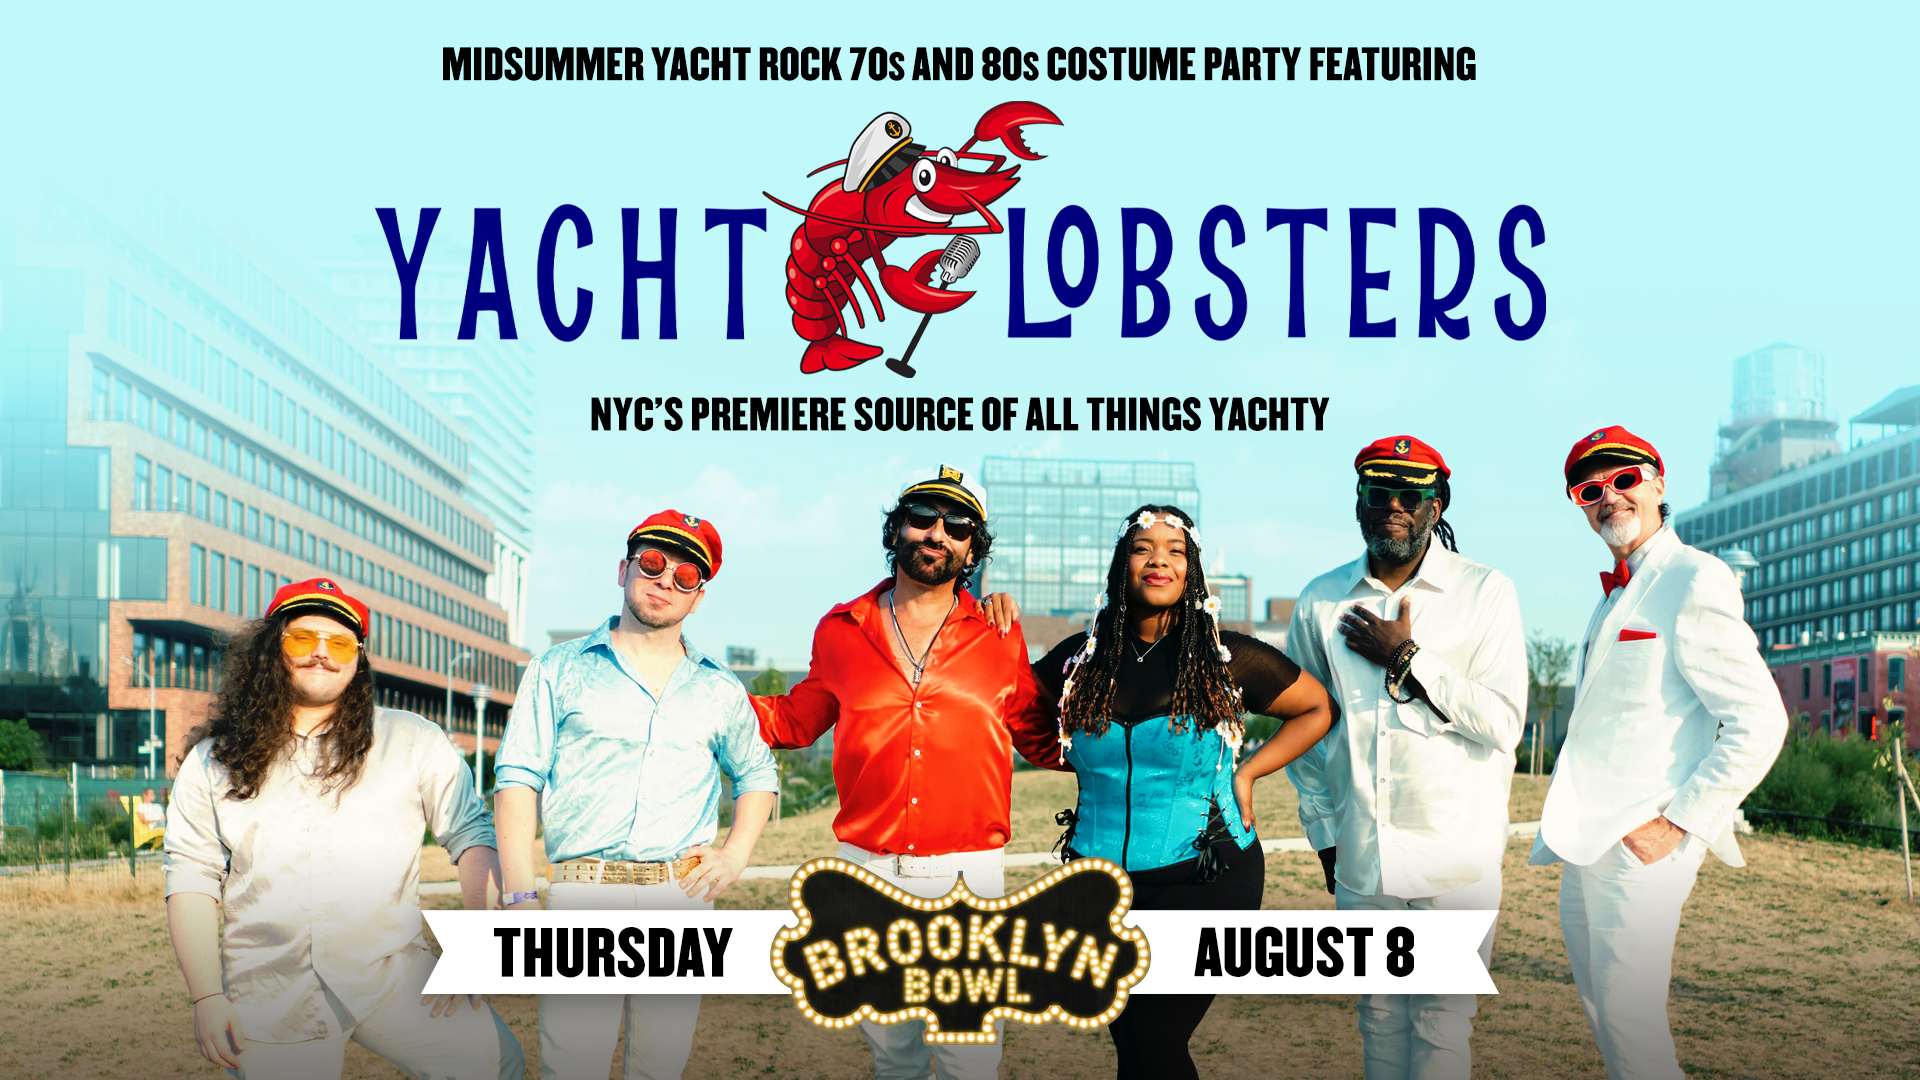 The Yacht Lobsters